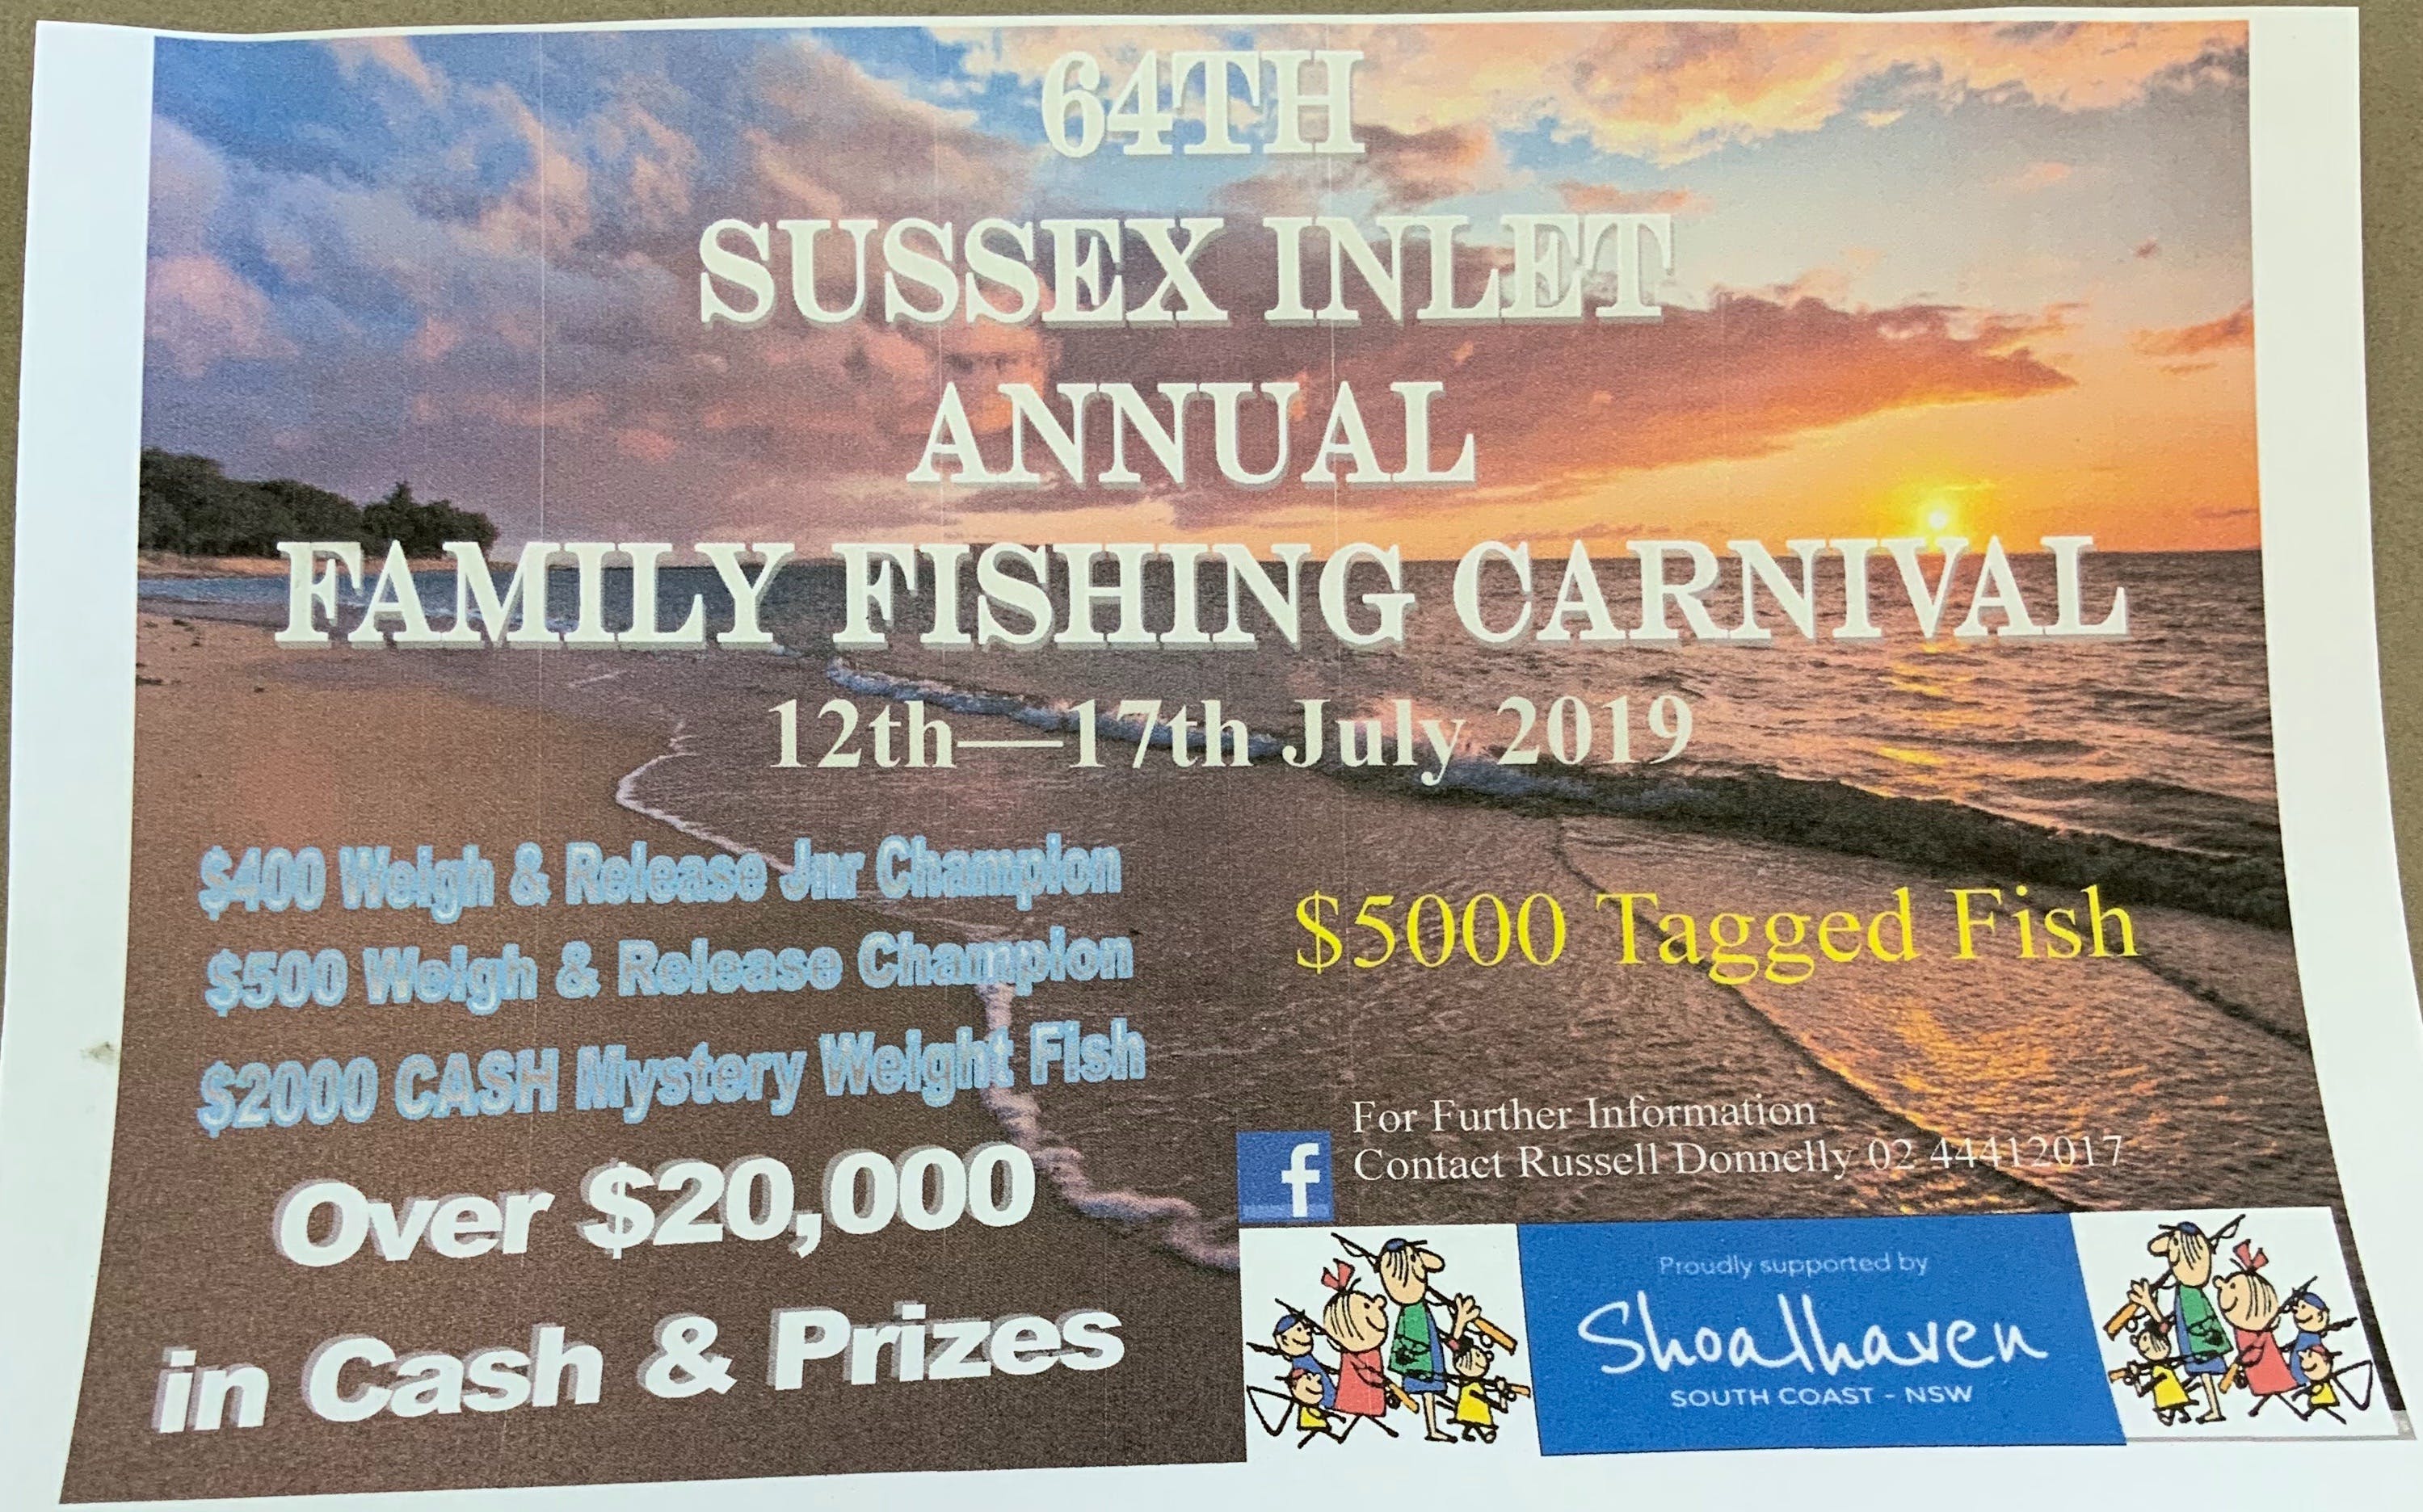 The Sussex Inlet Annual Family Fishing Carnival - Lismore Accommodation